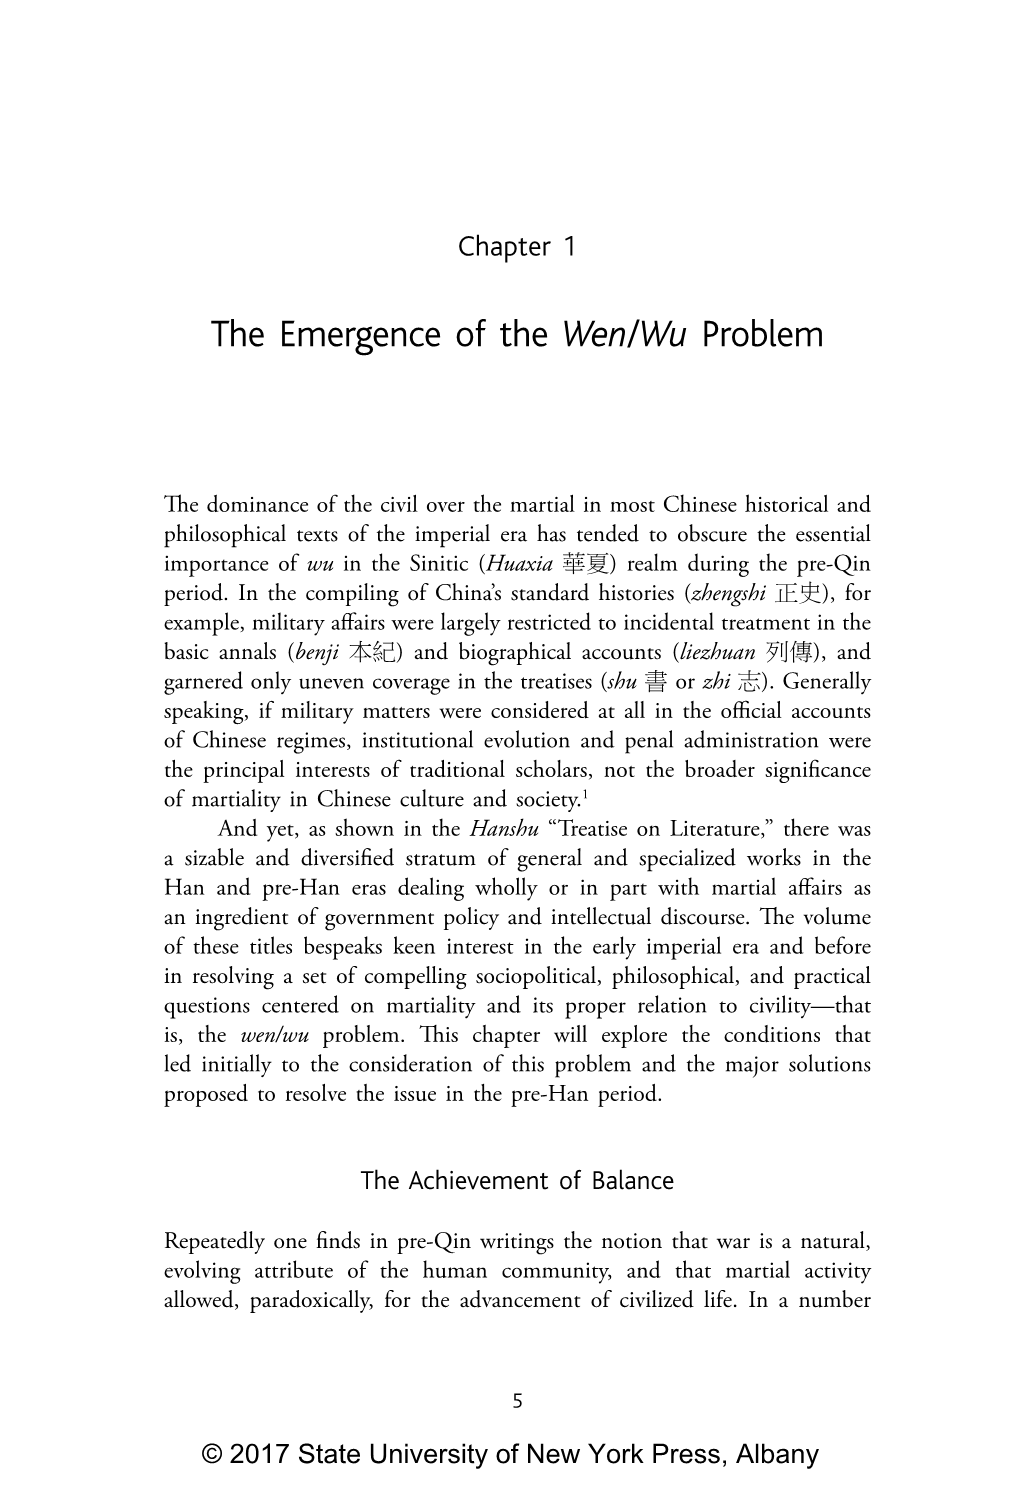 The Emergence of the Wen/Wu Problem